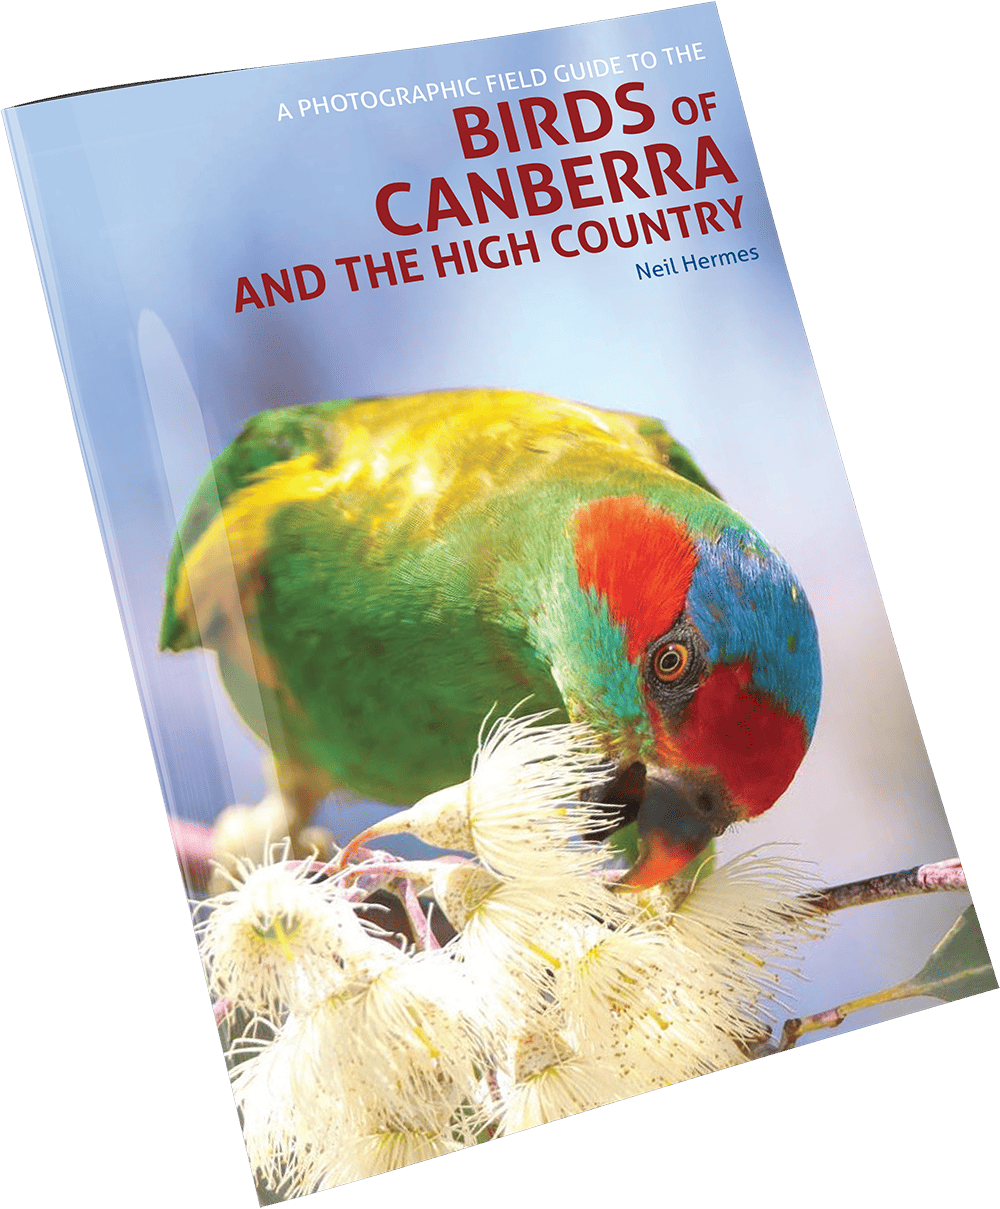 Neil Hermes Book: A Photographic Field Guide to the Birds of Canberra and The High Country